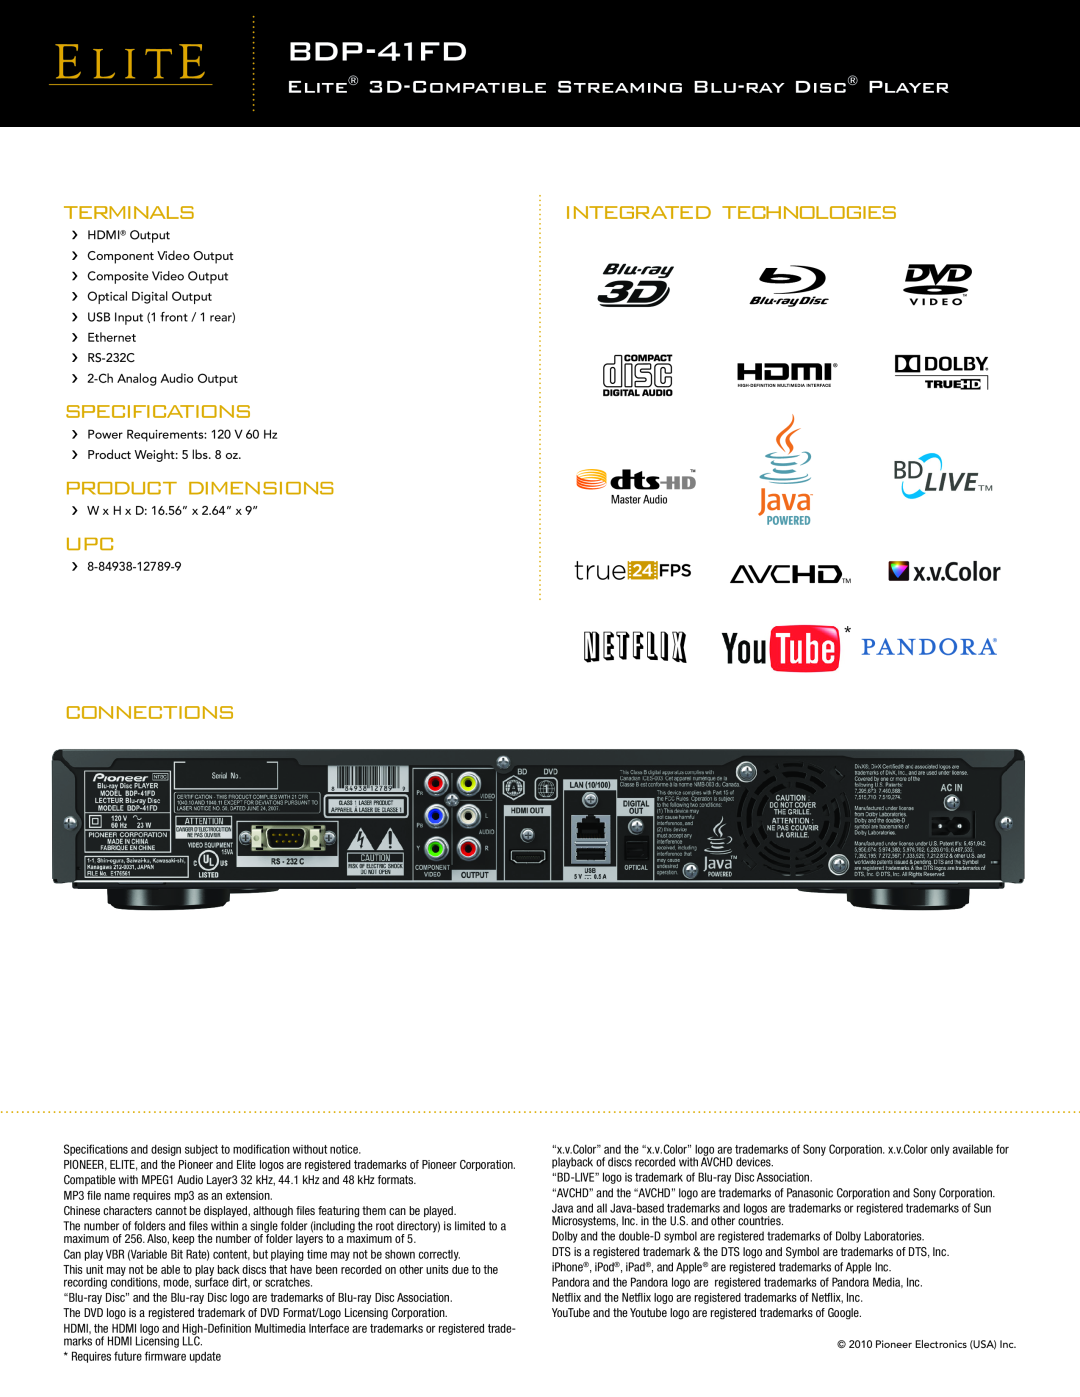 Pioneer BDP-41FD manual Terminals, Specifications, Product Dimensions, Integrated Technologies, Connections 